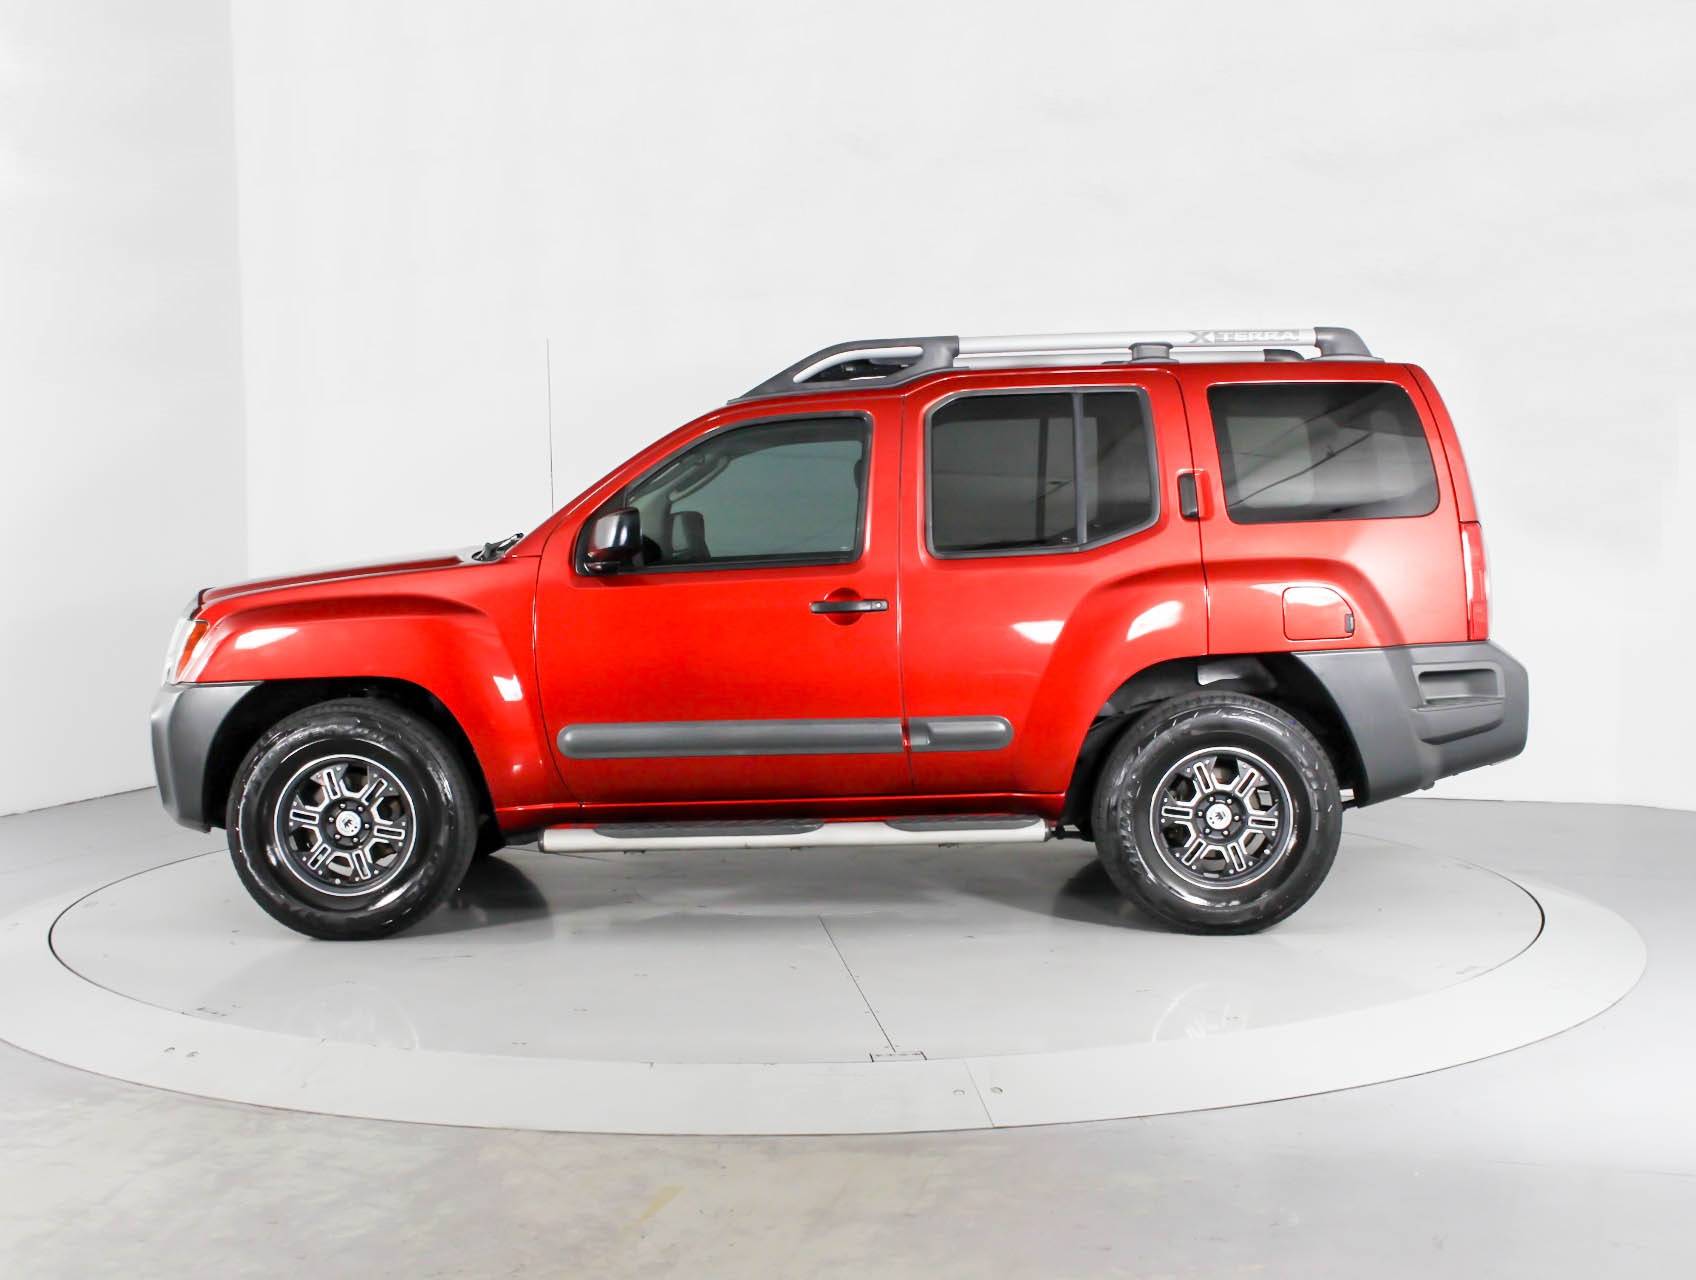 Used 2012 NISSAN XTERRA S for sale in WEST PALM | 93092